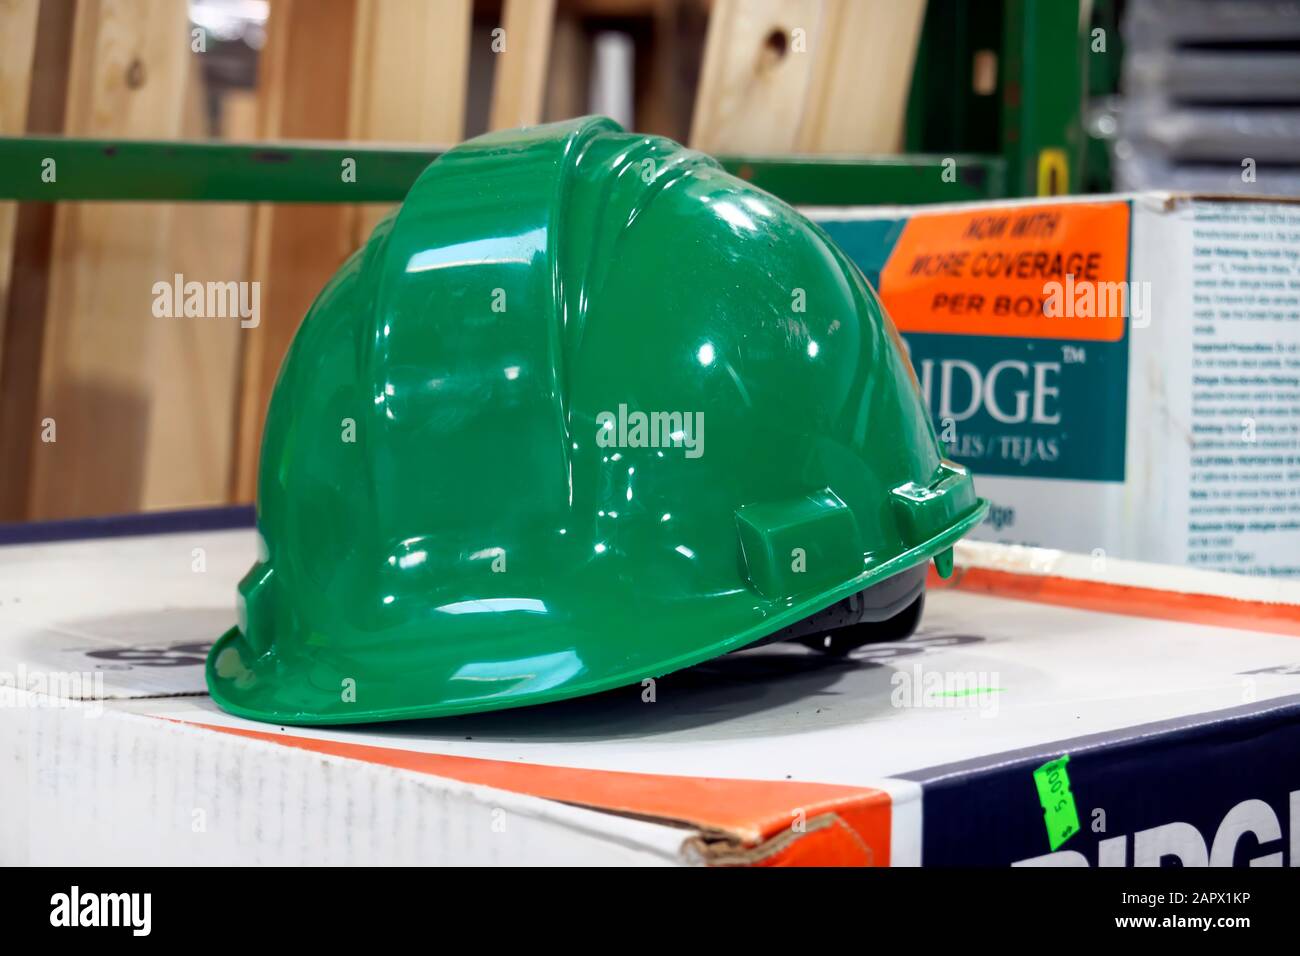 A green construction hardhat resting on a cardboard box inside a hardware store. Stock Photo